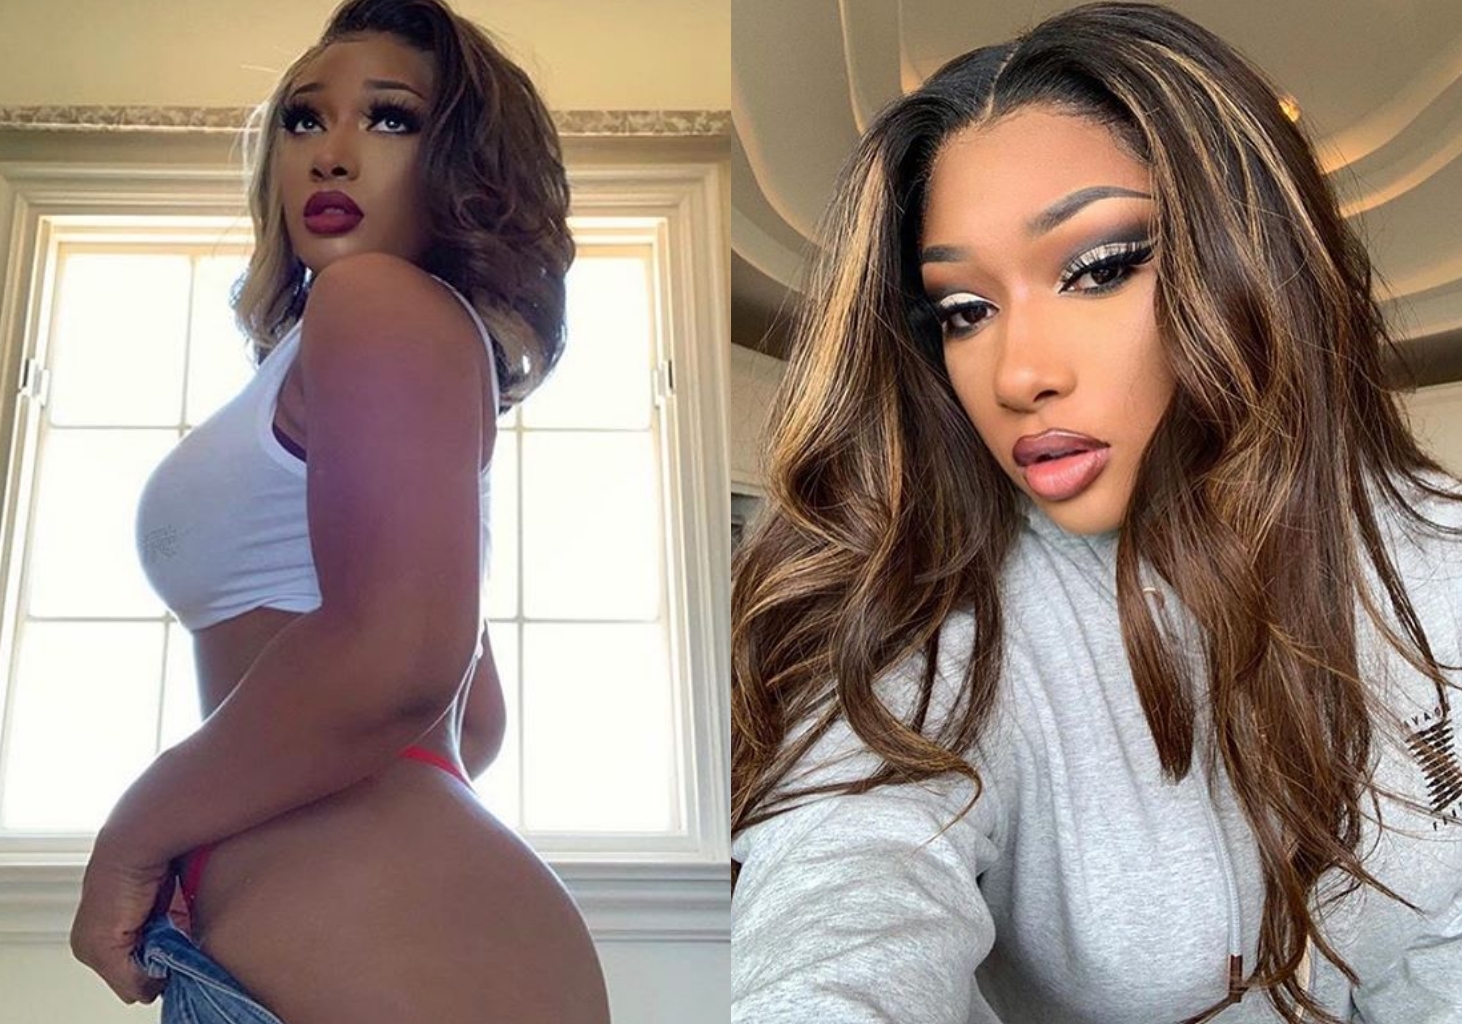 Megan Thee Stallion flaunt backside in new sultry photos